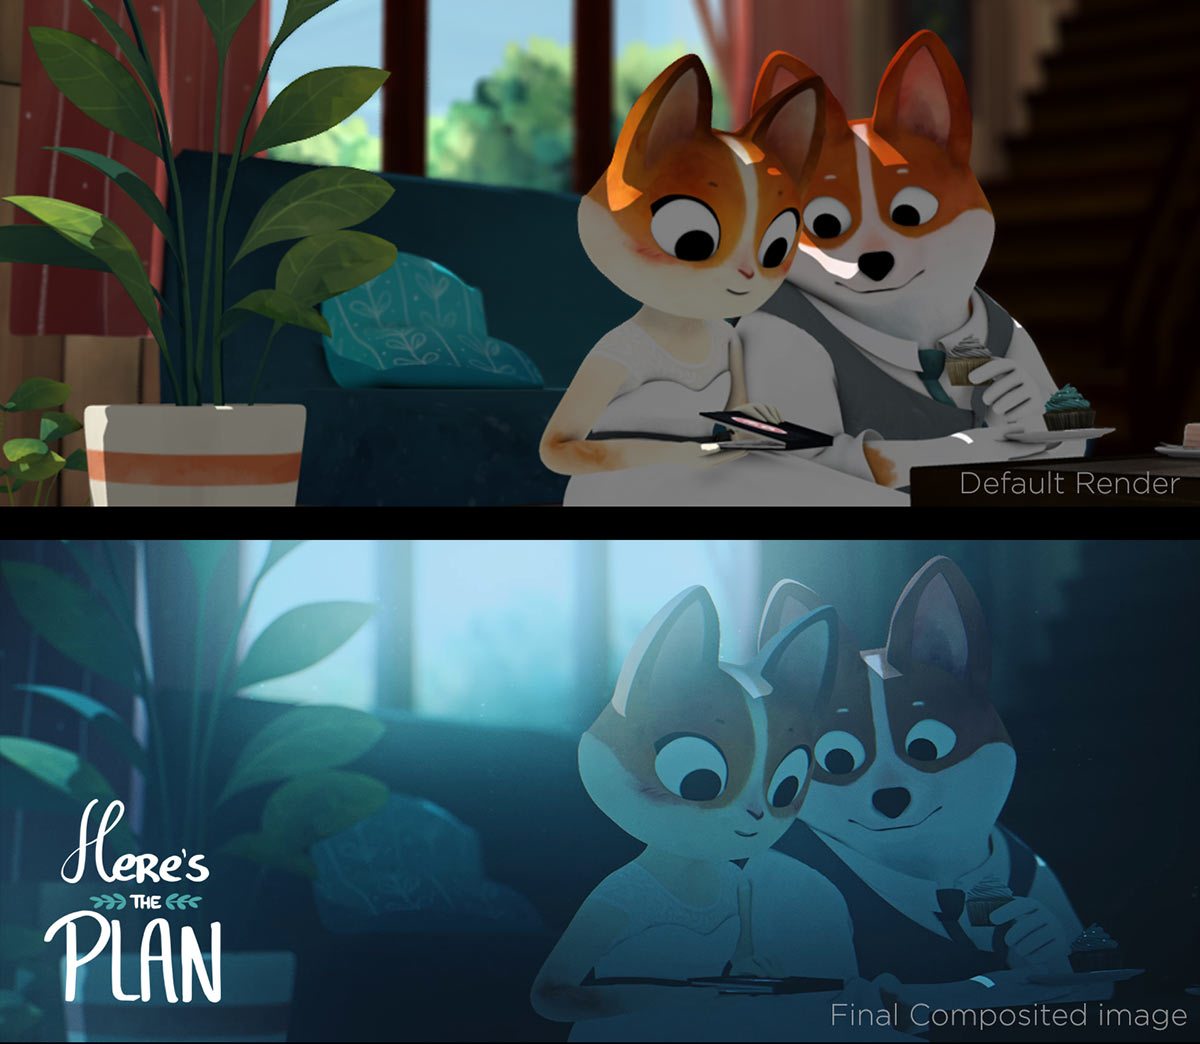 A scene comparison between the default render and the composited image in the finished film.